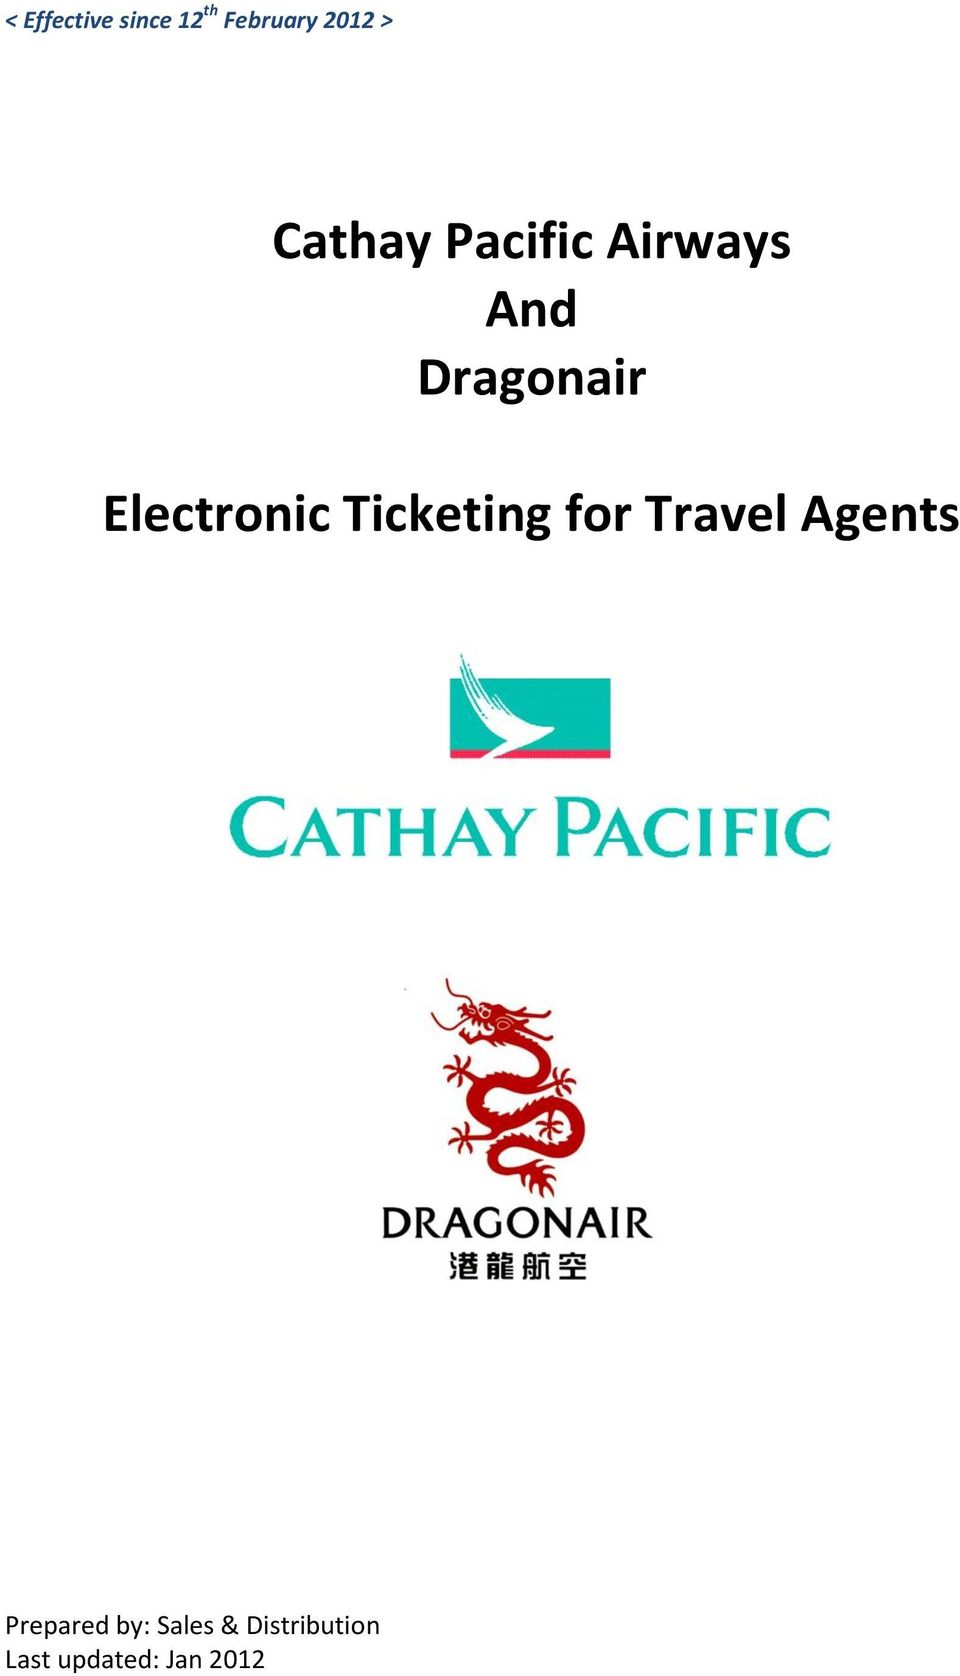 Electronic Ticketing for Travel Agents